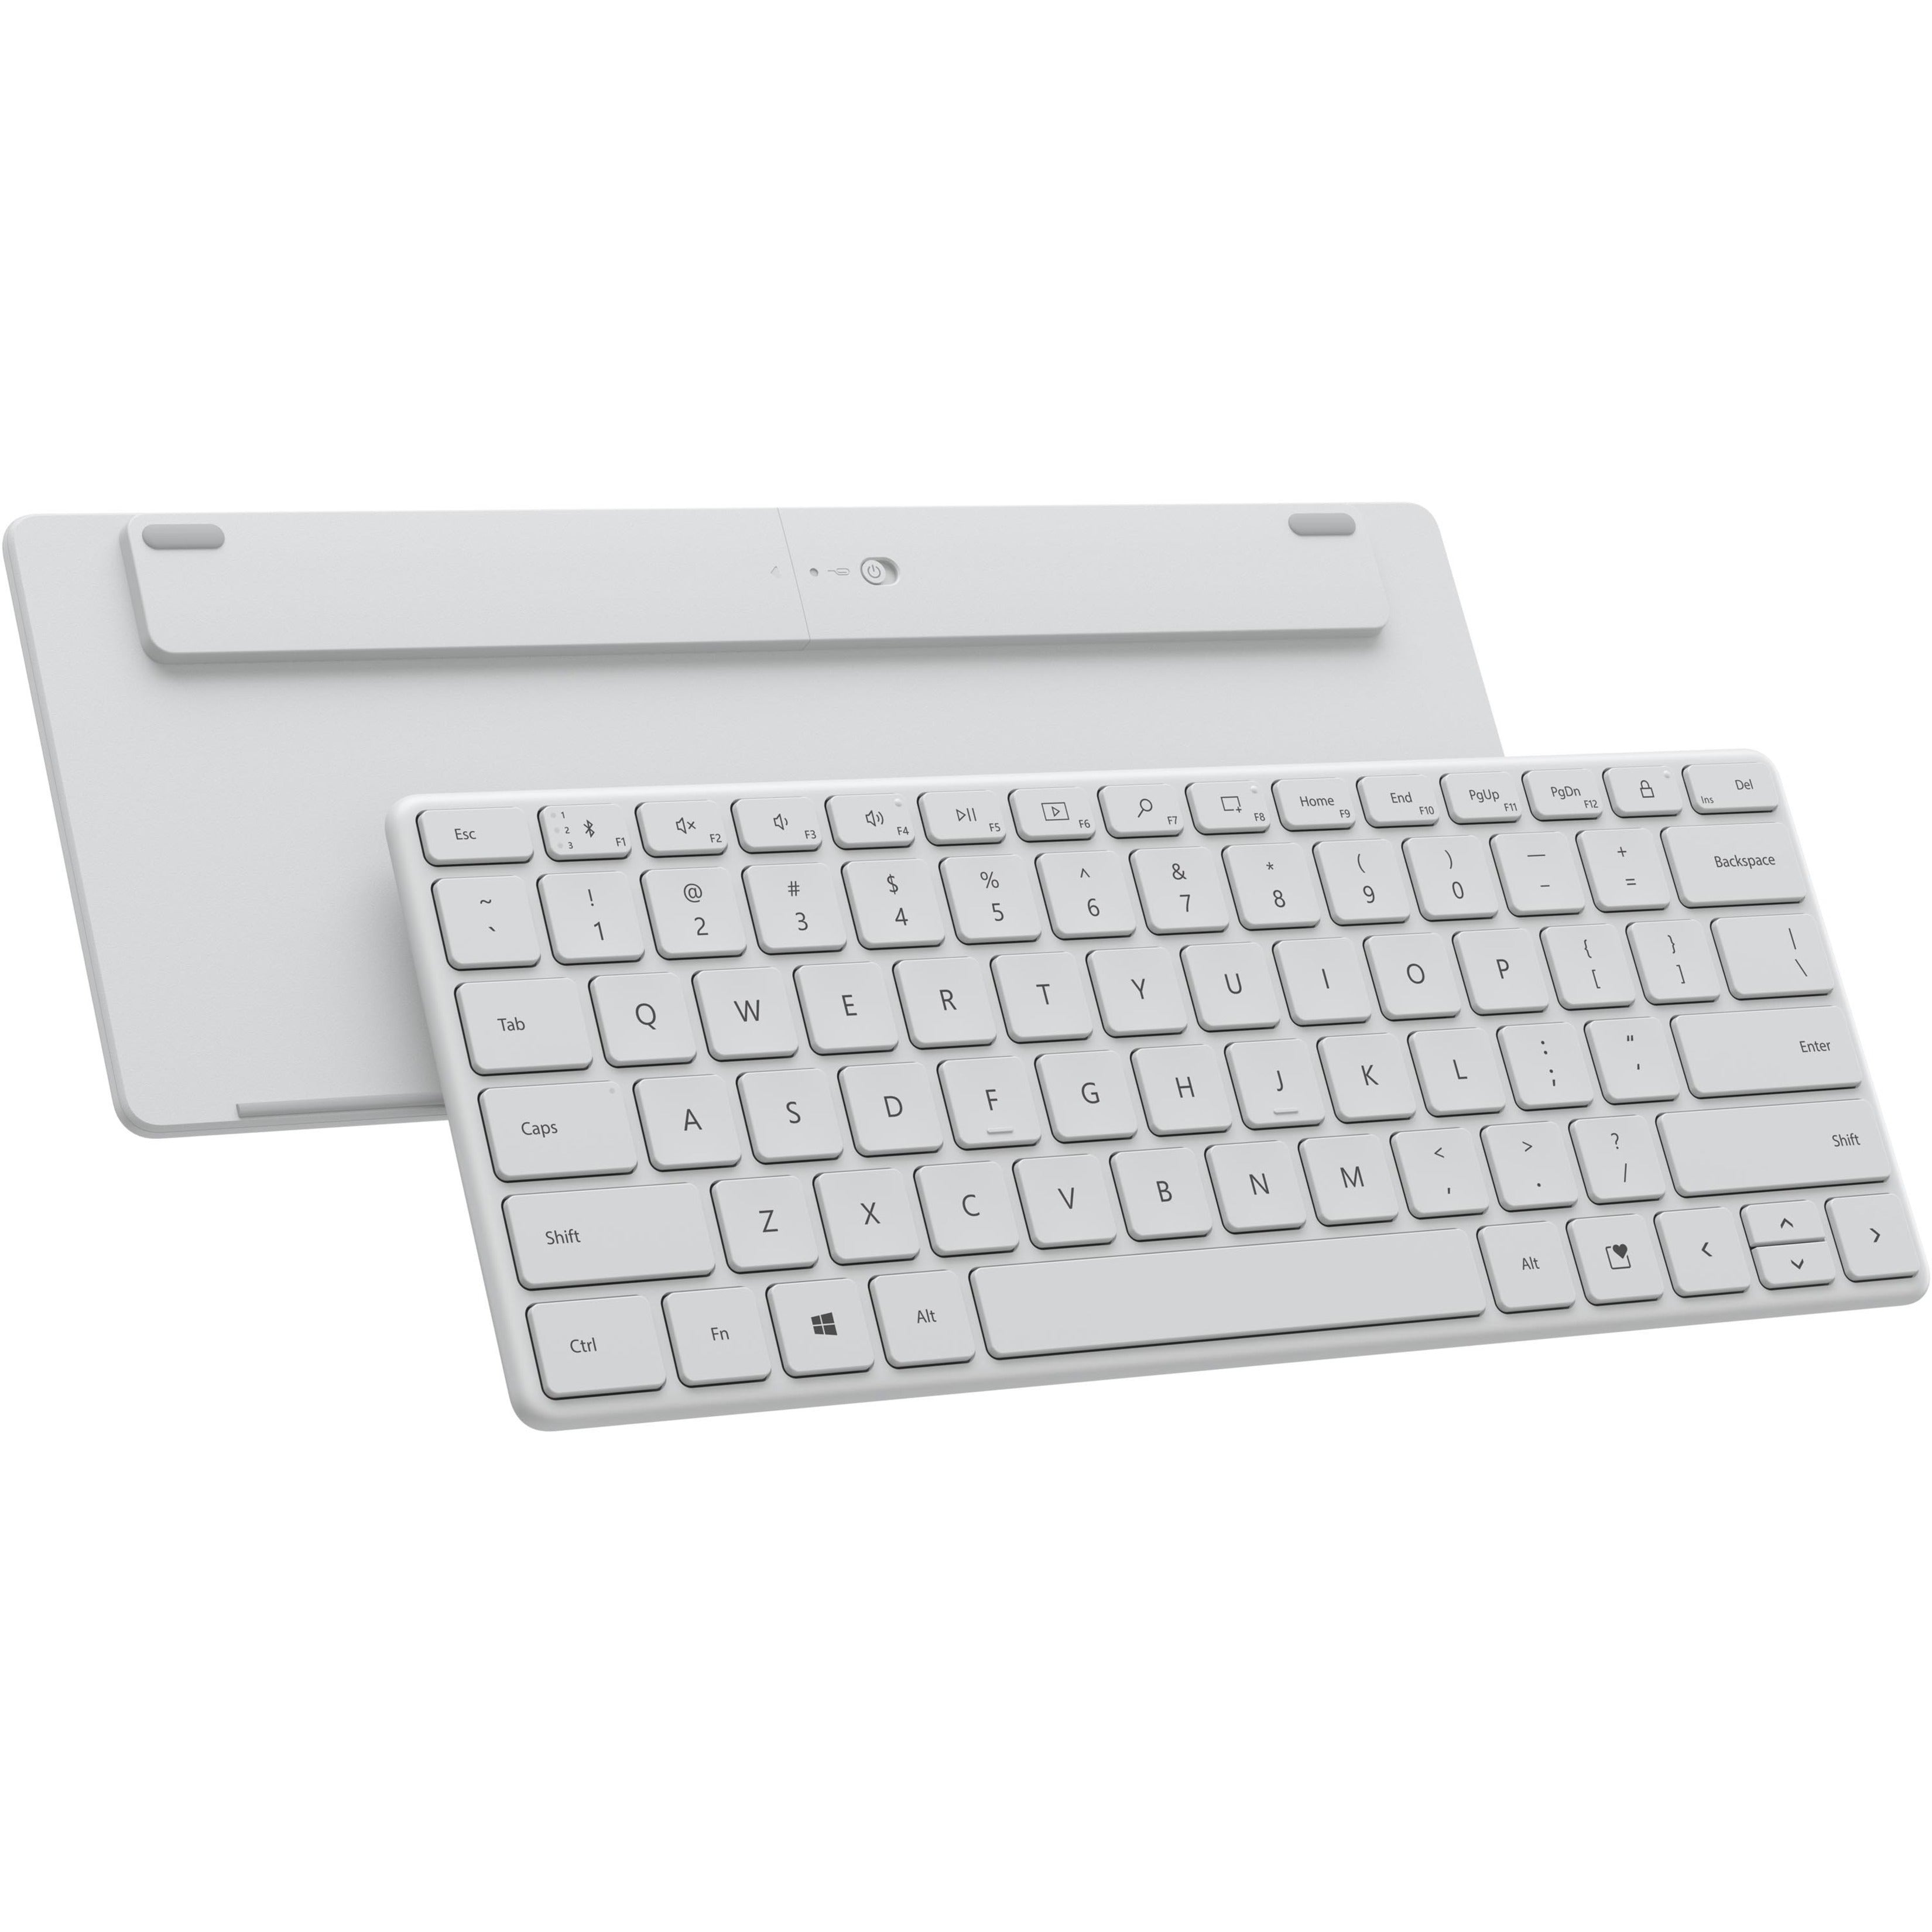 Microsoft 21Y-00031 Keyboard, Bluetooth 5, Swift Pair, Compact, Multi-host Support